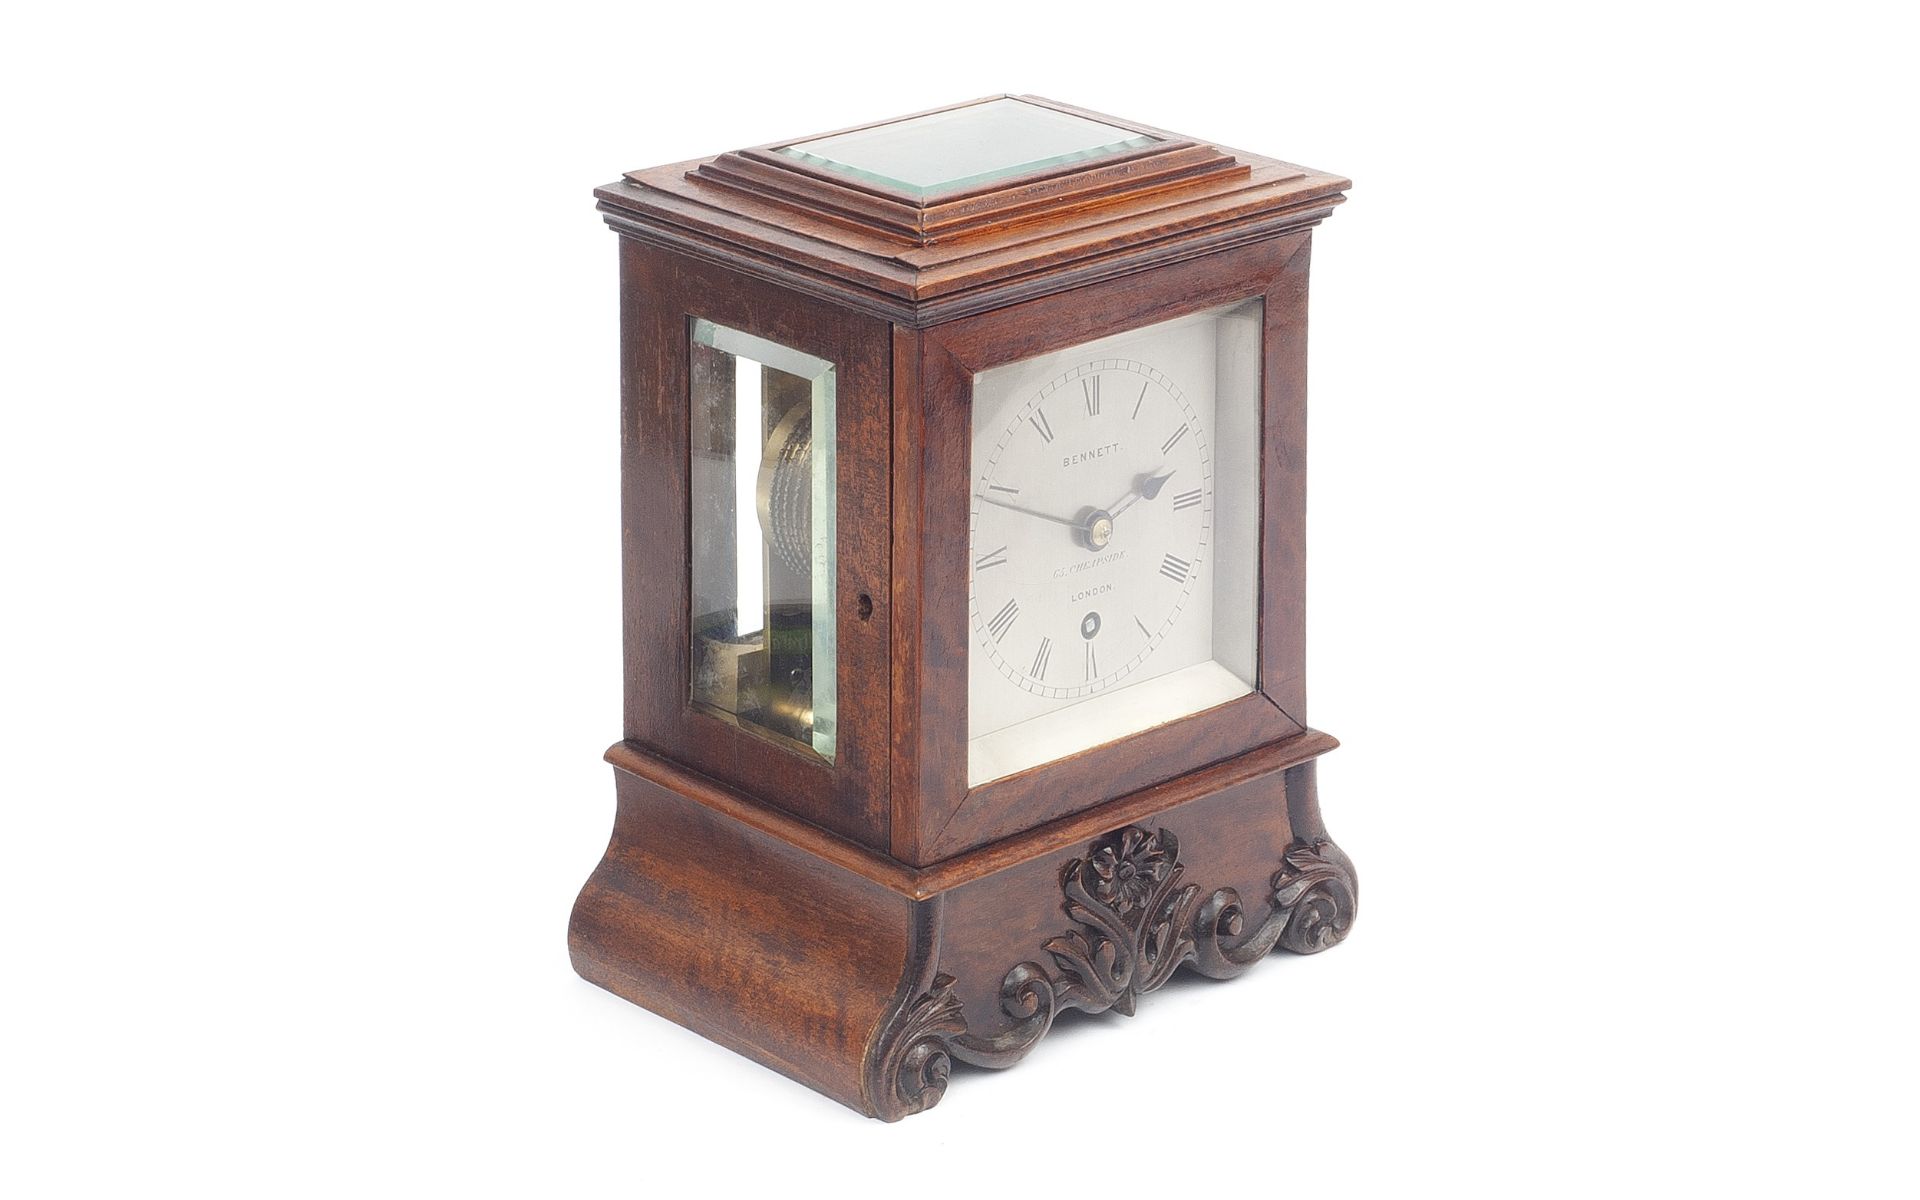 A MID 19TH CENTURY ENGLISH FOUR GLASS LIBRARY CLOCK SIGNED 'BENNETT, 65 CHEAPSIDE' - Image 2 of 3